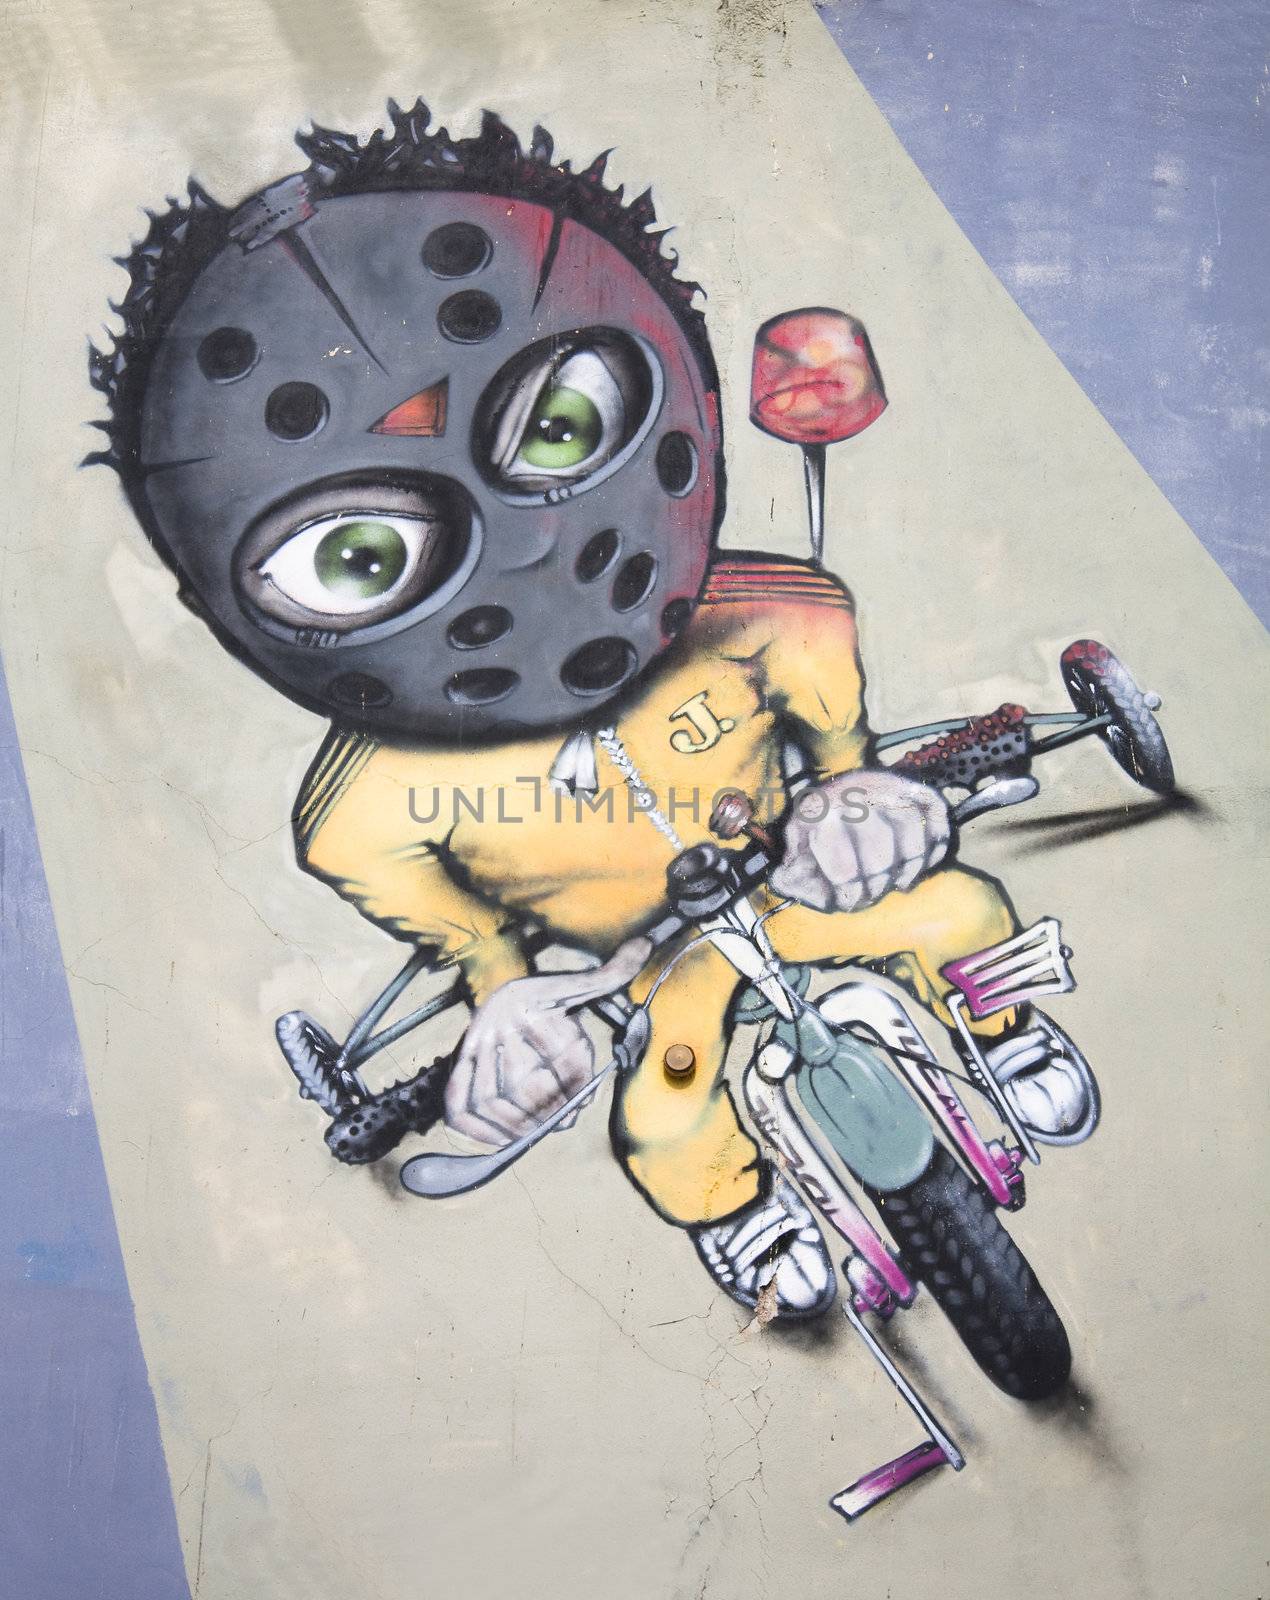 Graffiti in Athens showing a youngster riding a bike with a helmet on.